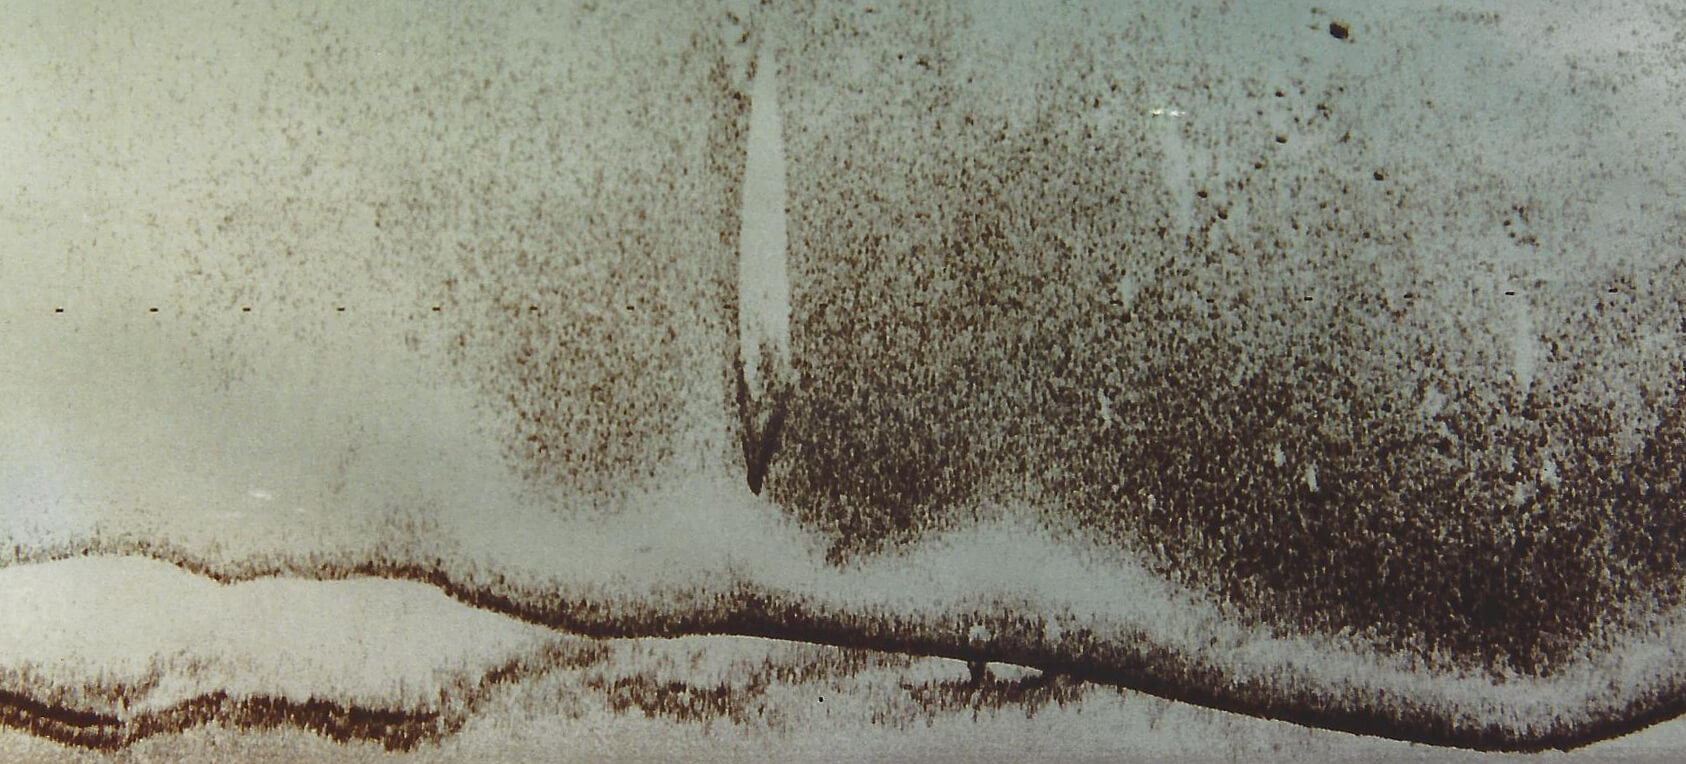 Image of a boat on lake bottom from original side scan sonar on thermal paper in 1992